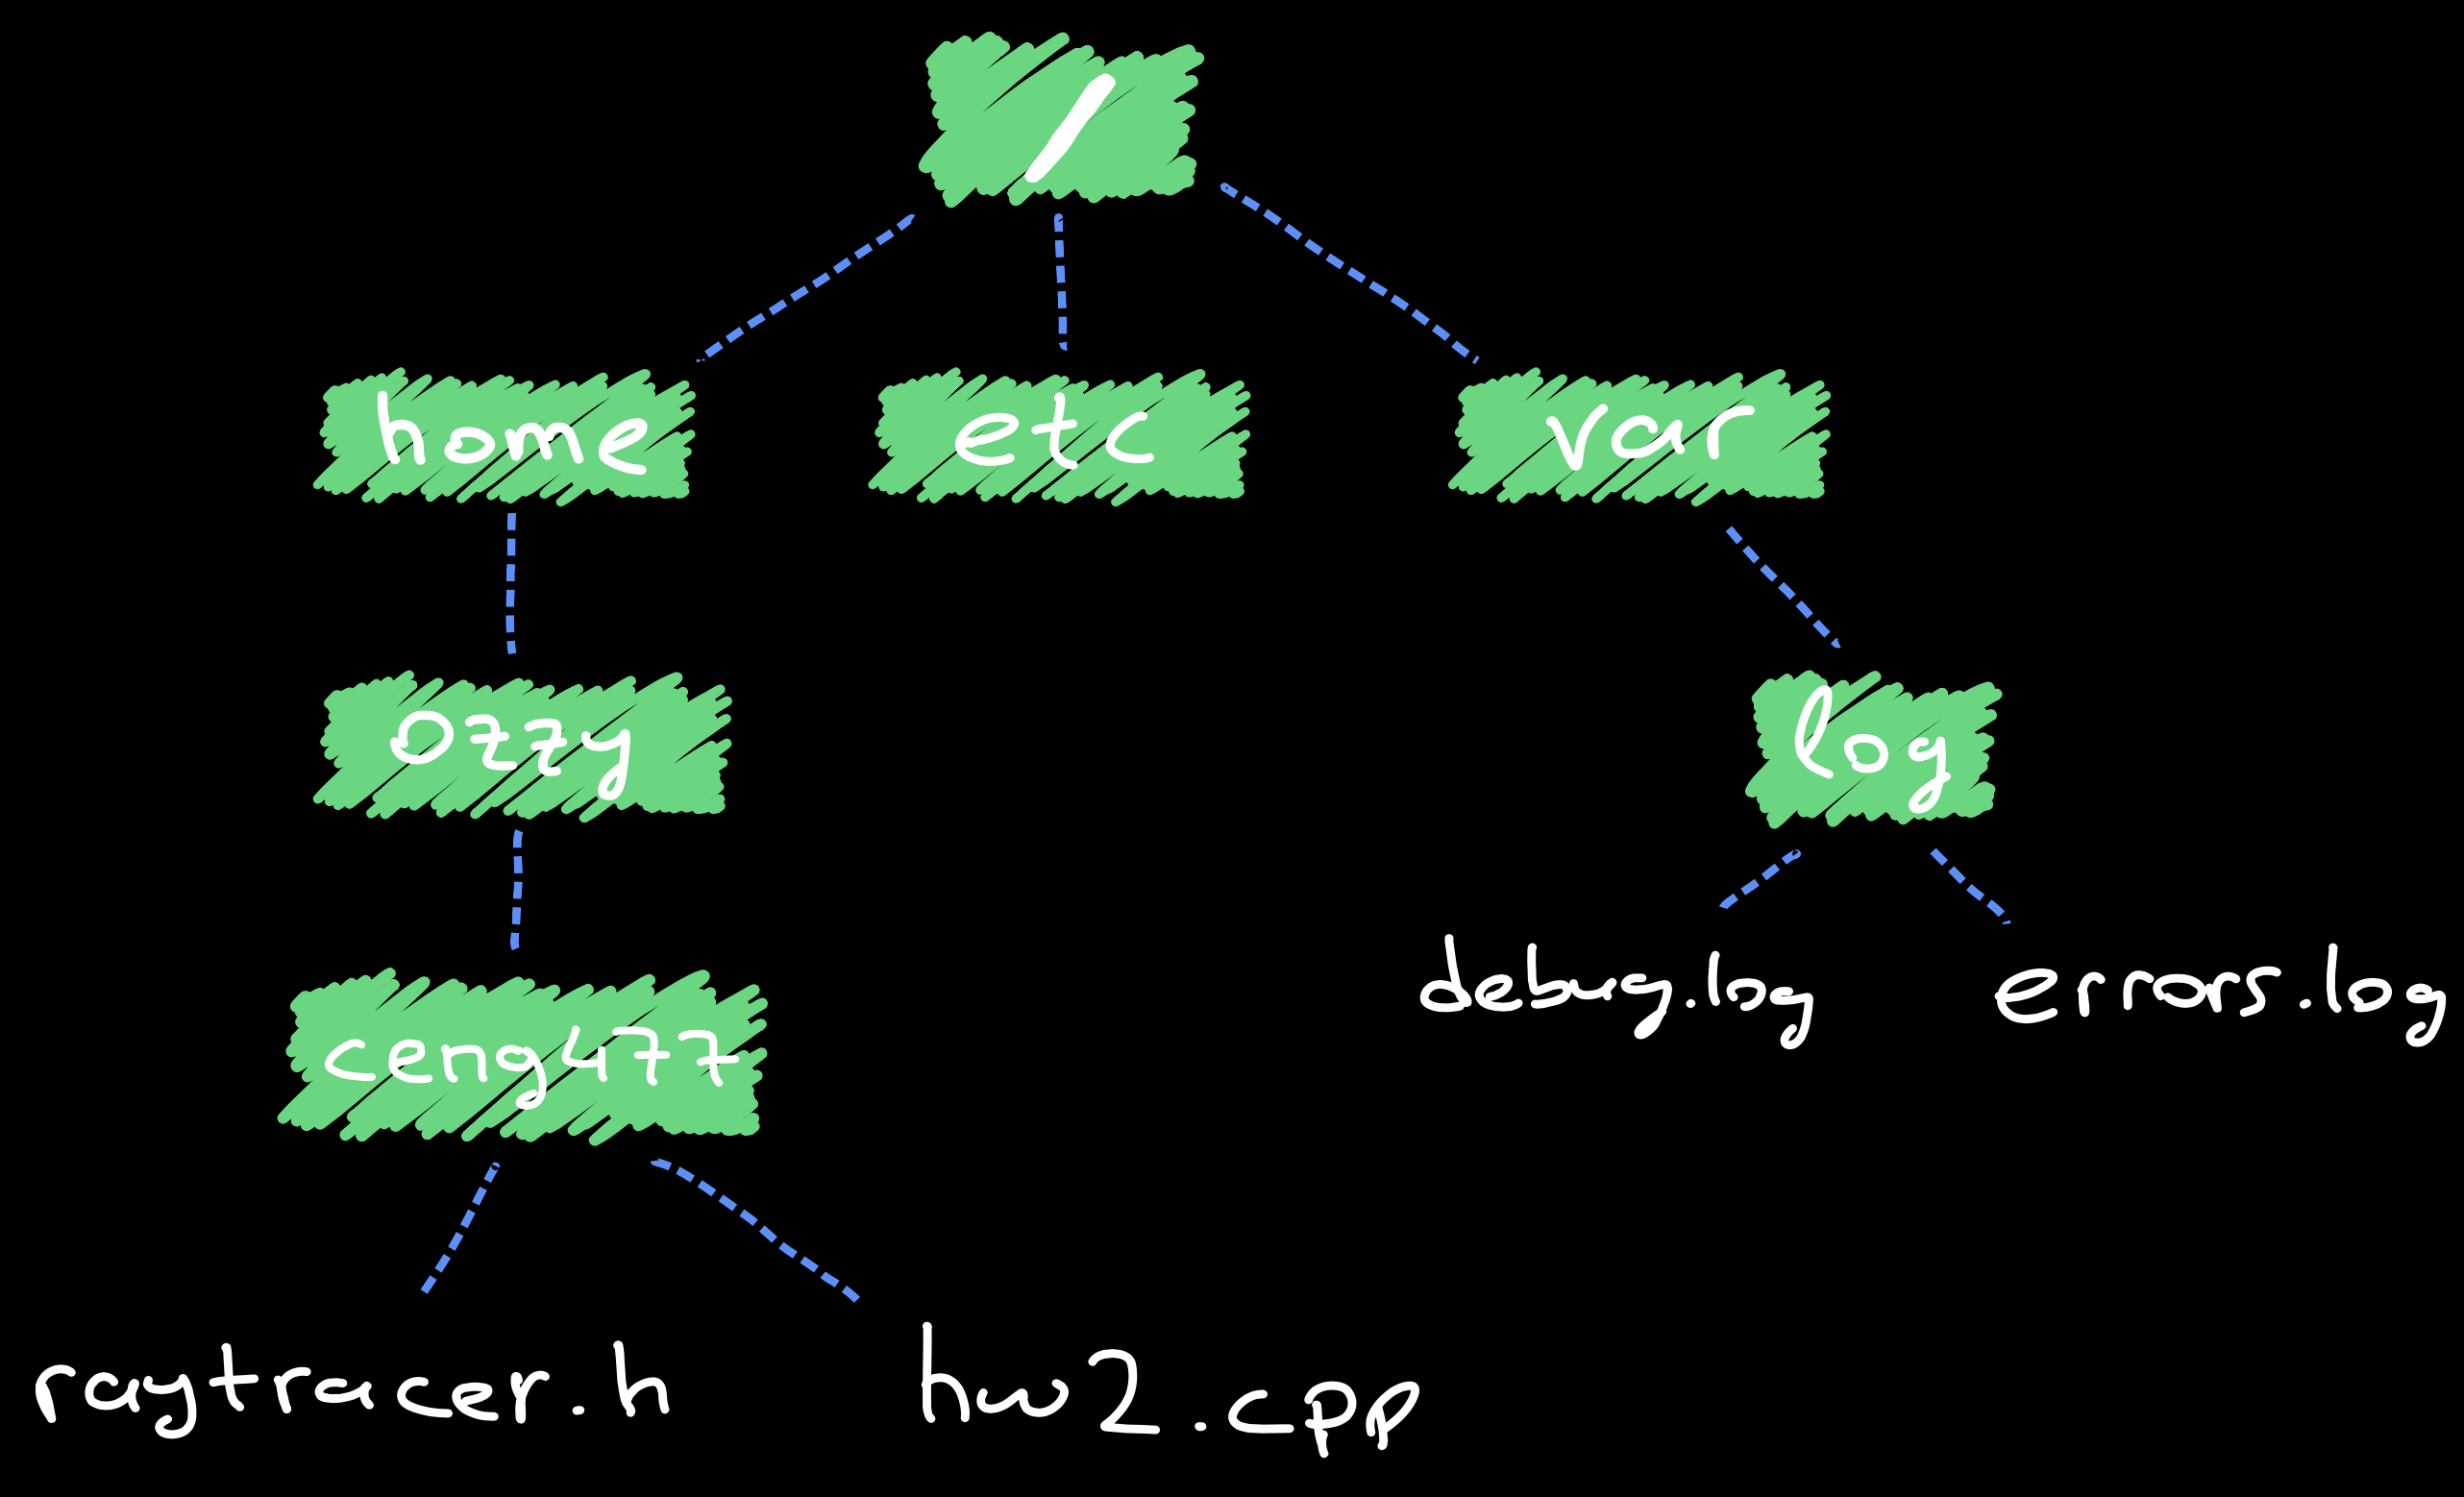 An example file tree in UNIX-like filesystem format